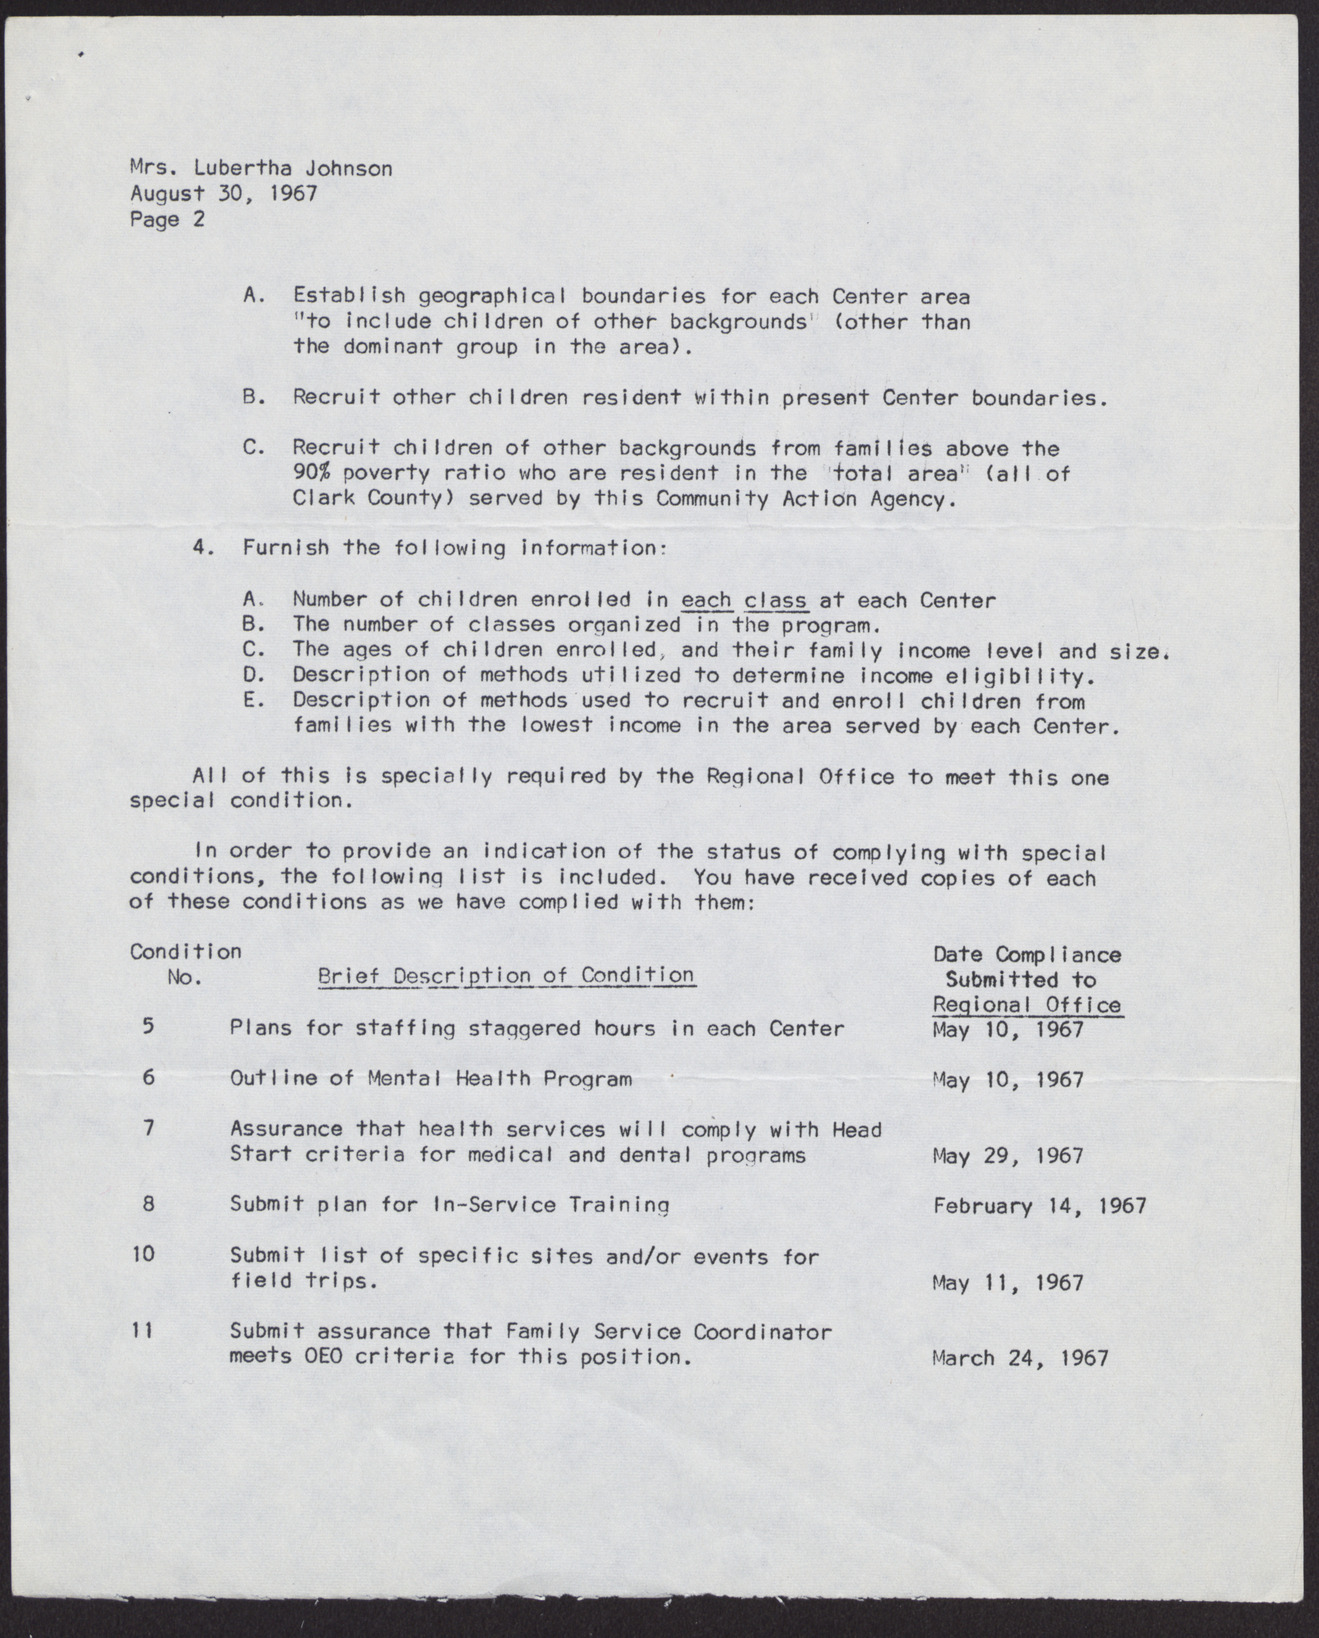 Letter to Mrs. Lubertha M. Johnson from W. F. Cottrell (3 pages), August 30, 1967, page 2